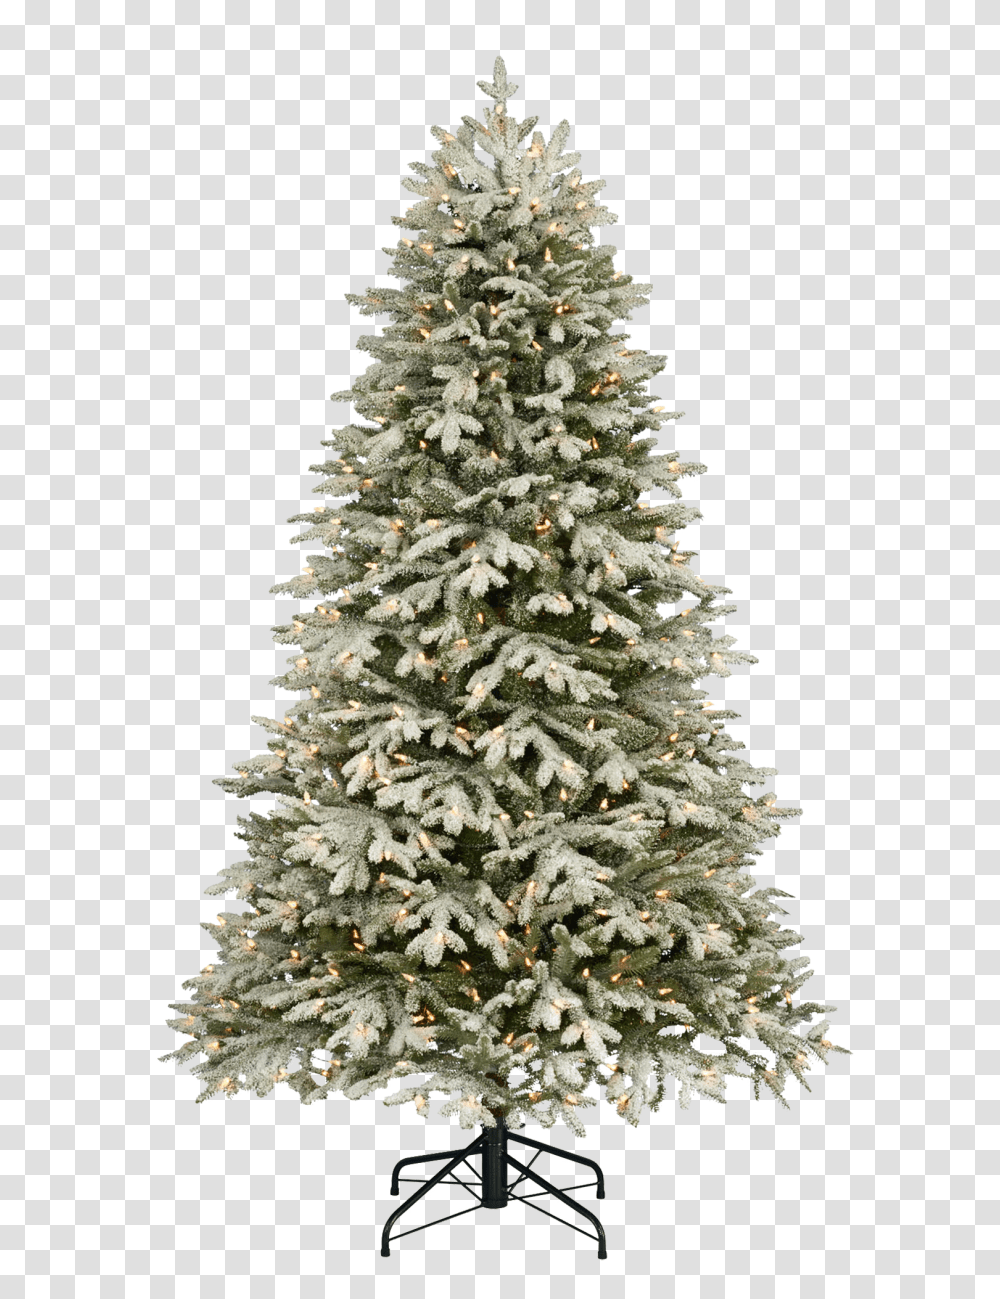 Christmas Tree With Snow Image Different Types Of Christmas Trees, Ornament, Plant, Pine, Conifer Transparent Png